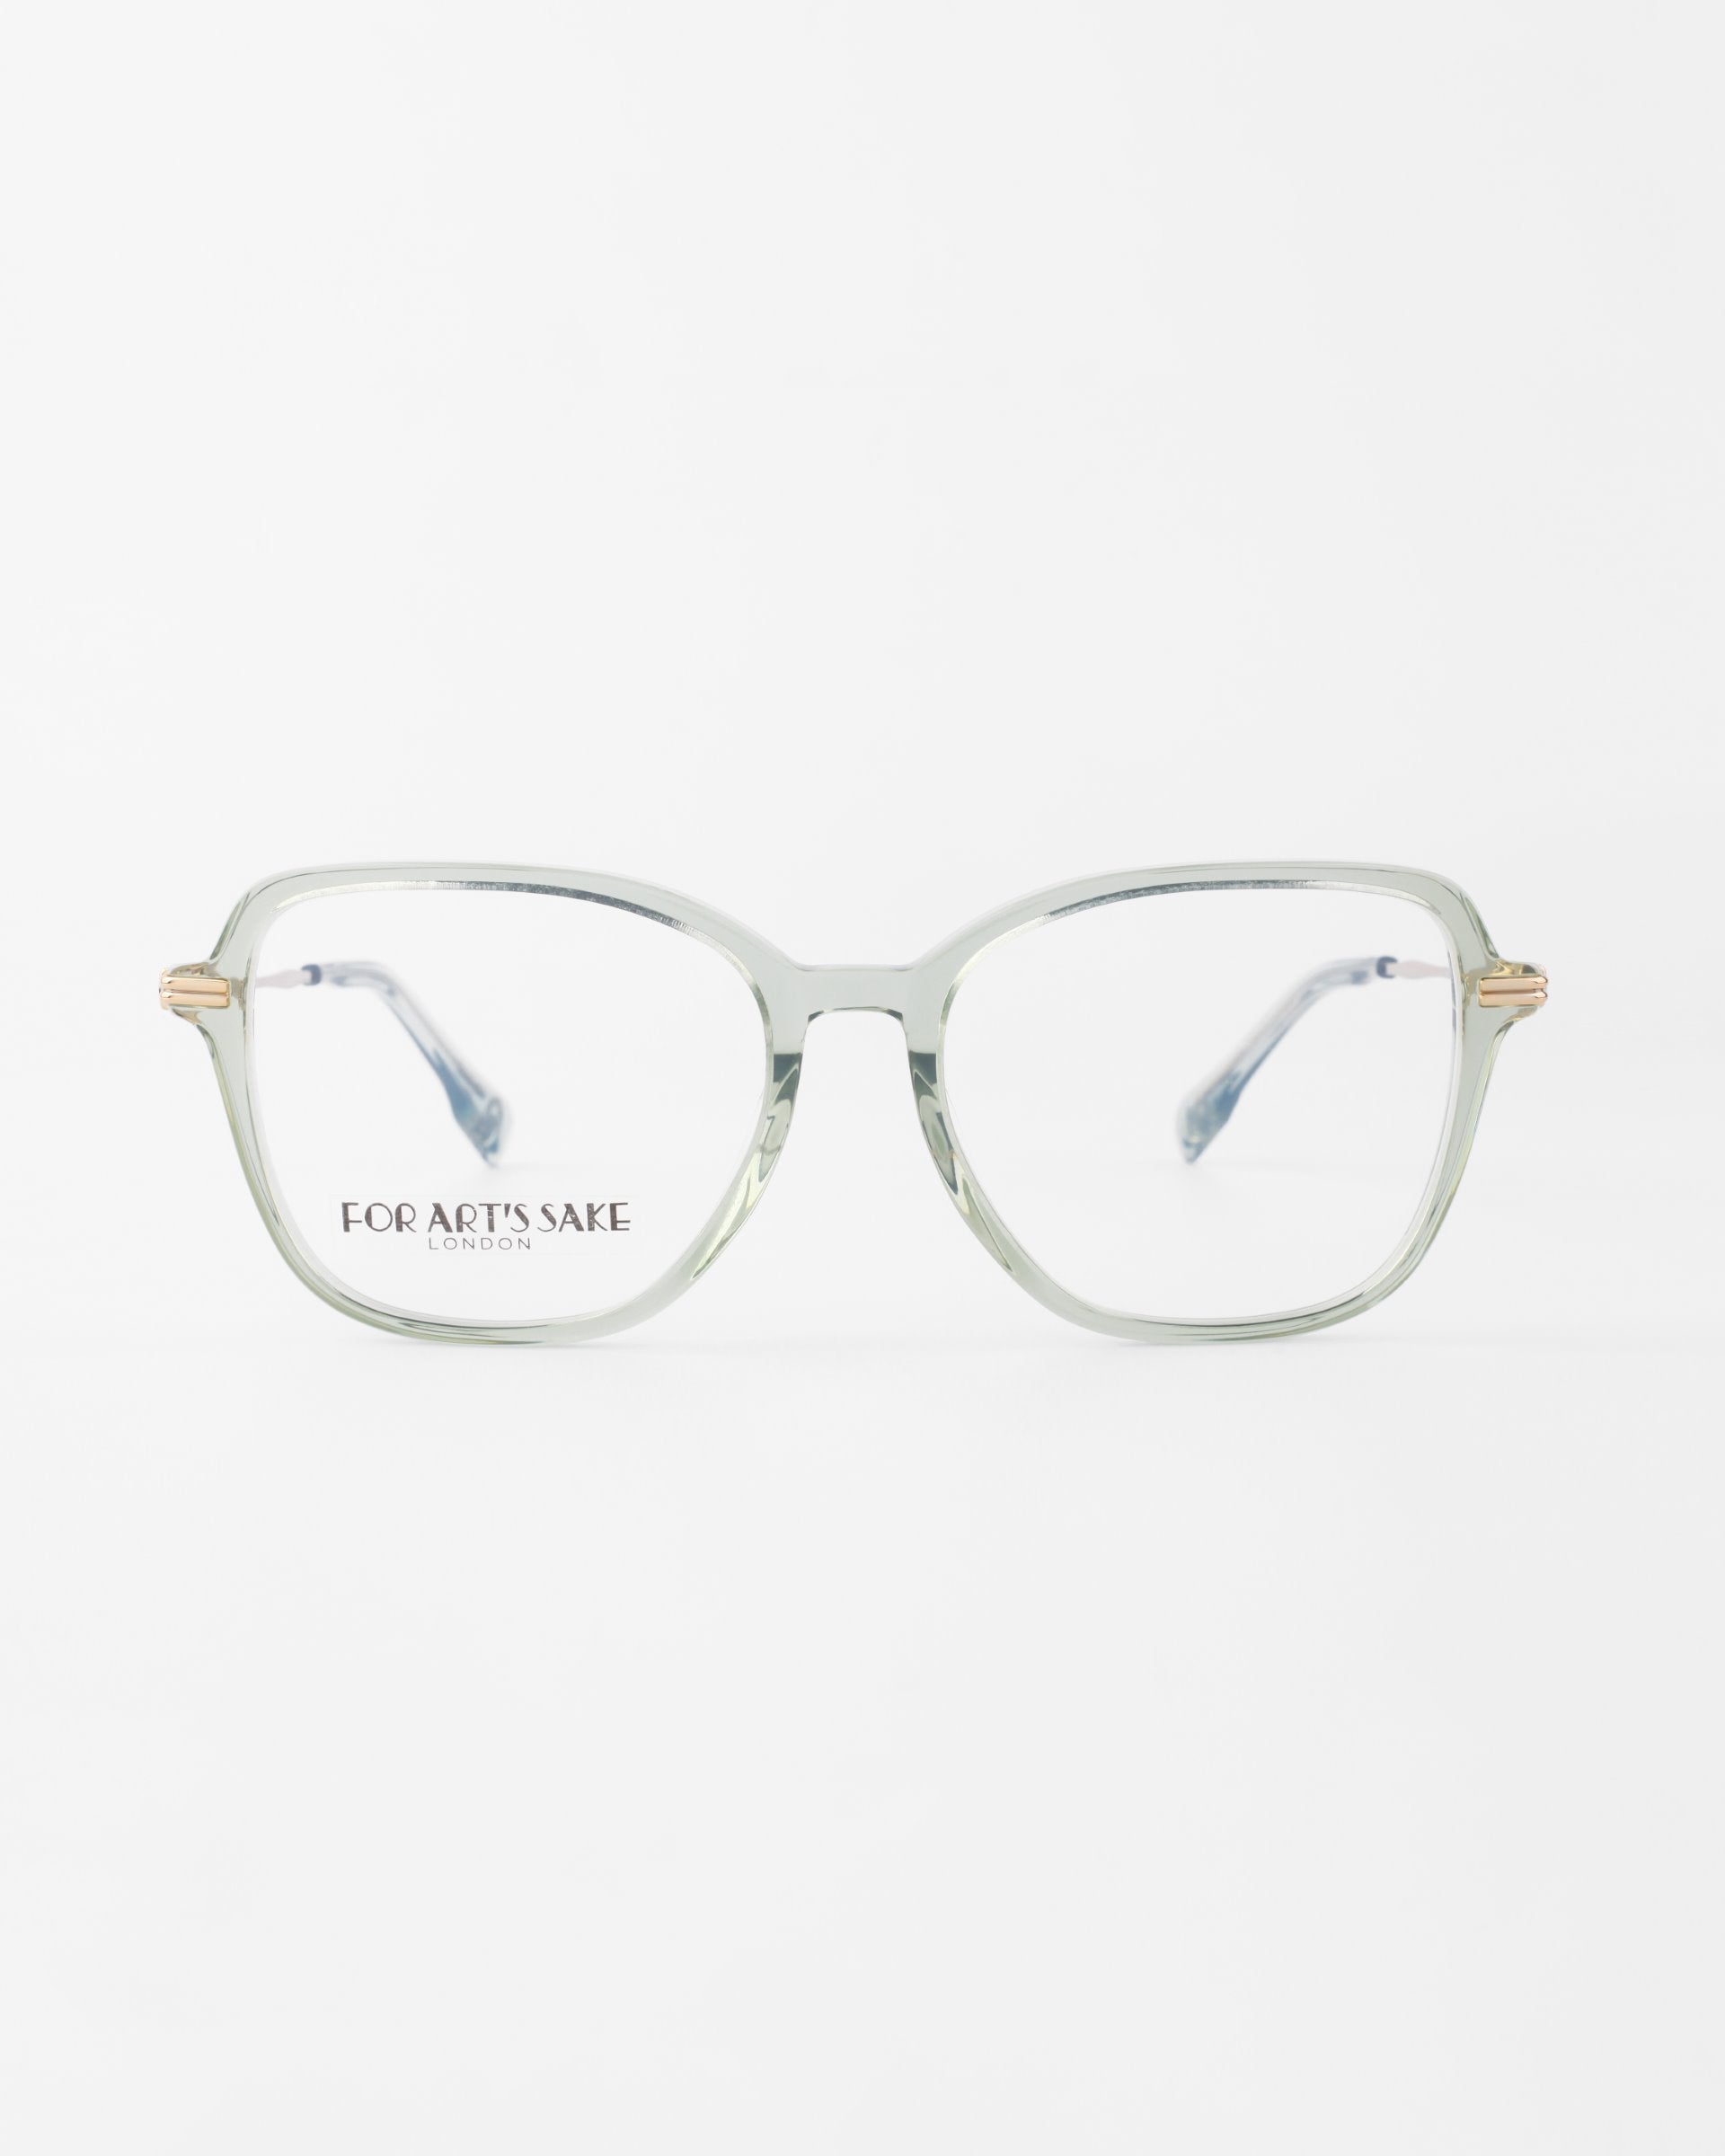 A pair of transparent, square-shaped eyeglasses with thin 18-karat gold-plated arms is displayed on a white background. The words "FOR ART’S SAKE LONDON" are printed on the left lens. These Sonnet frames from For Art's Sake® offer optional prescription lenses and a blue light filter for added protection.